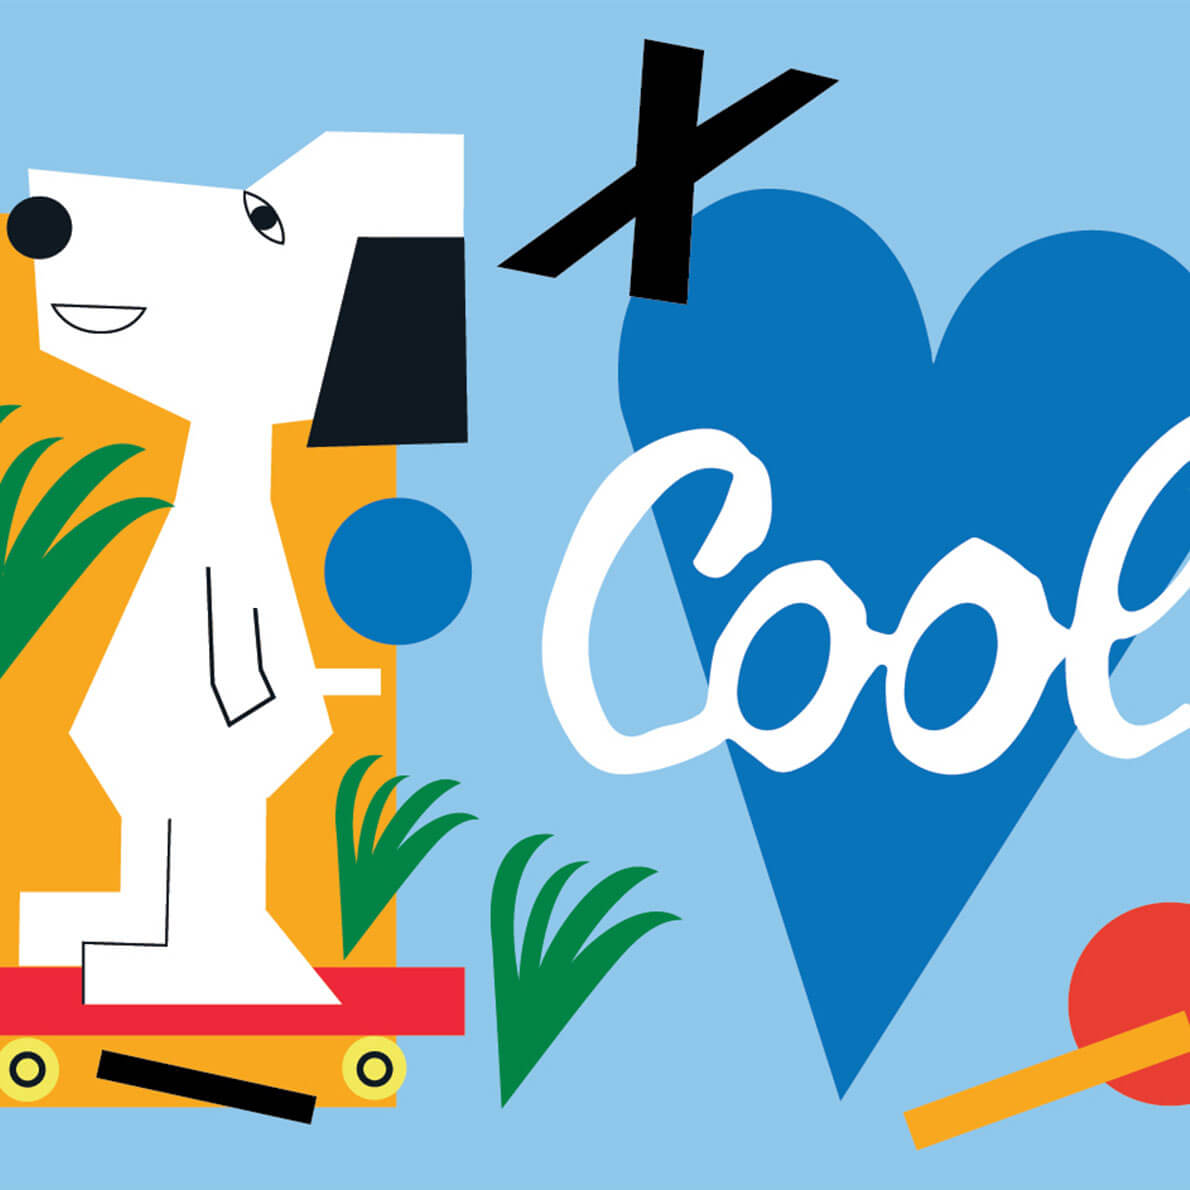 A black and white dog in front of a yellow and blue background and the word “Cool” written on the right side.